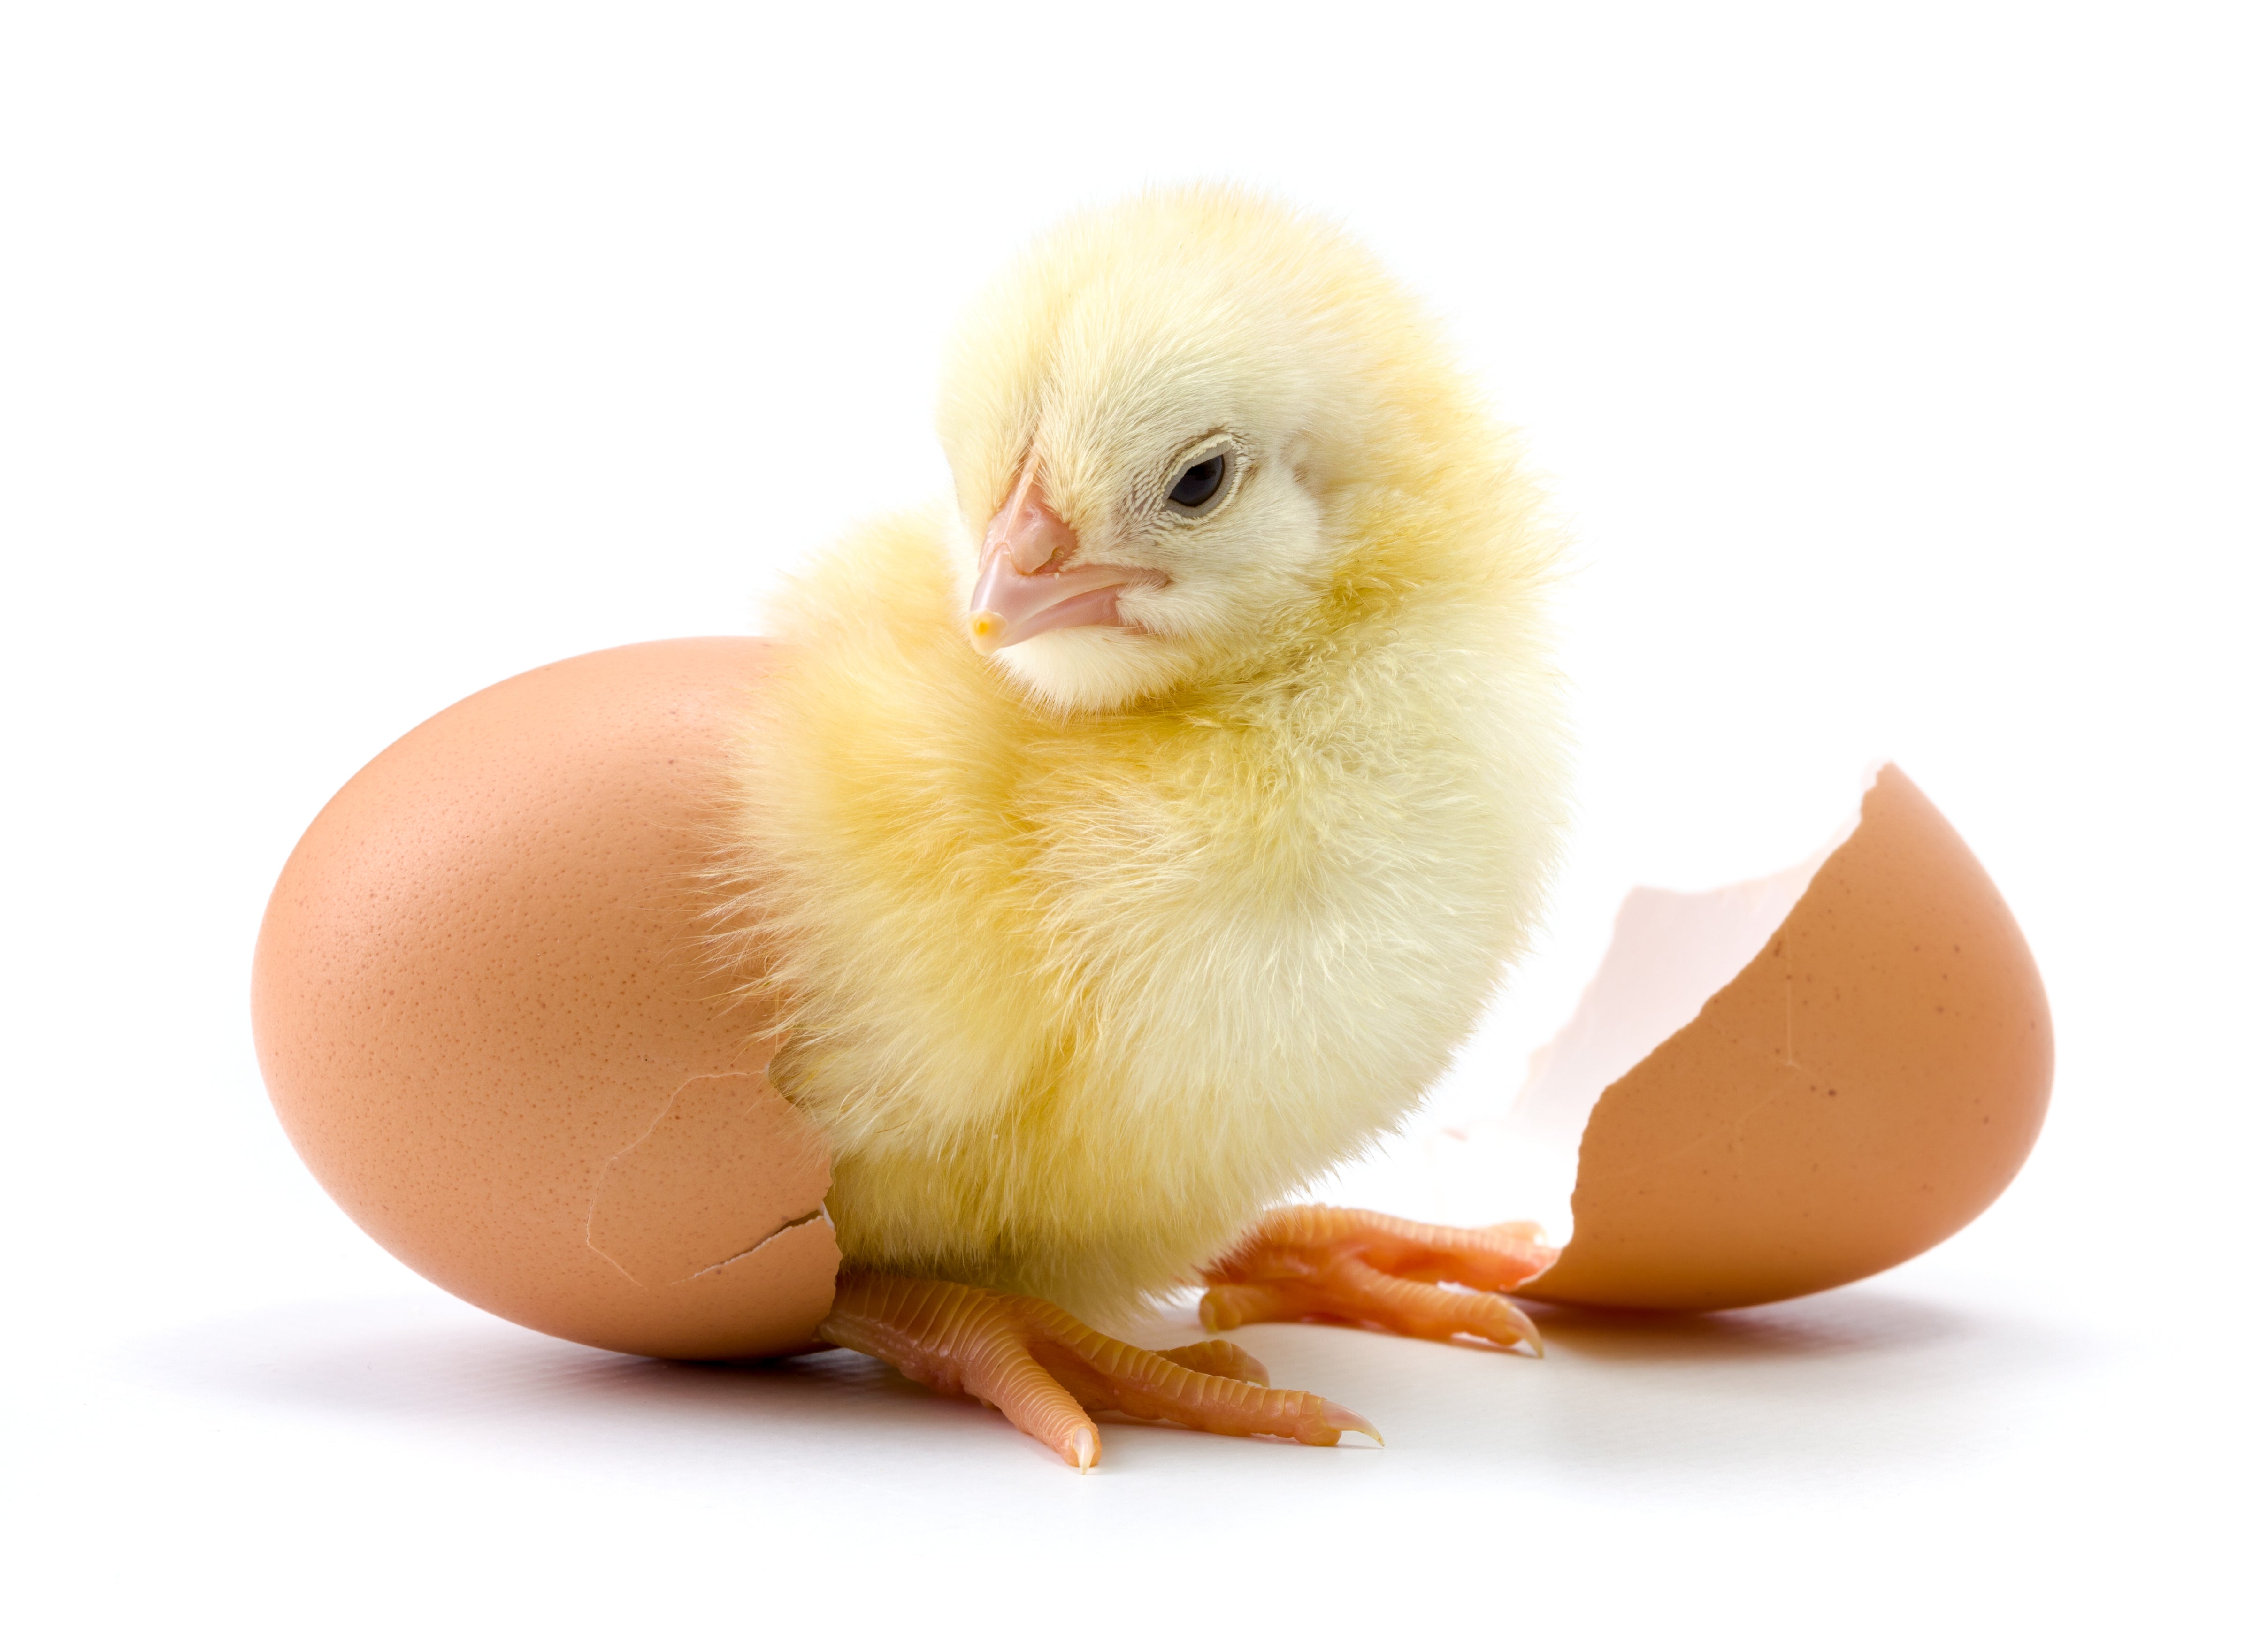 How do you tell if a baby chick is female or male? 